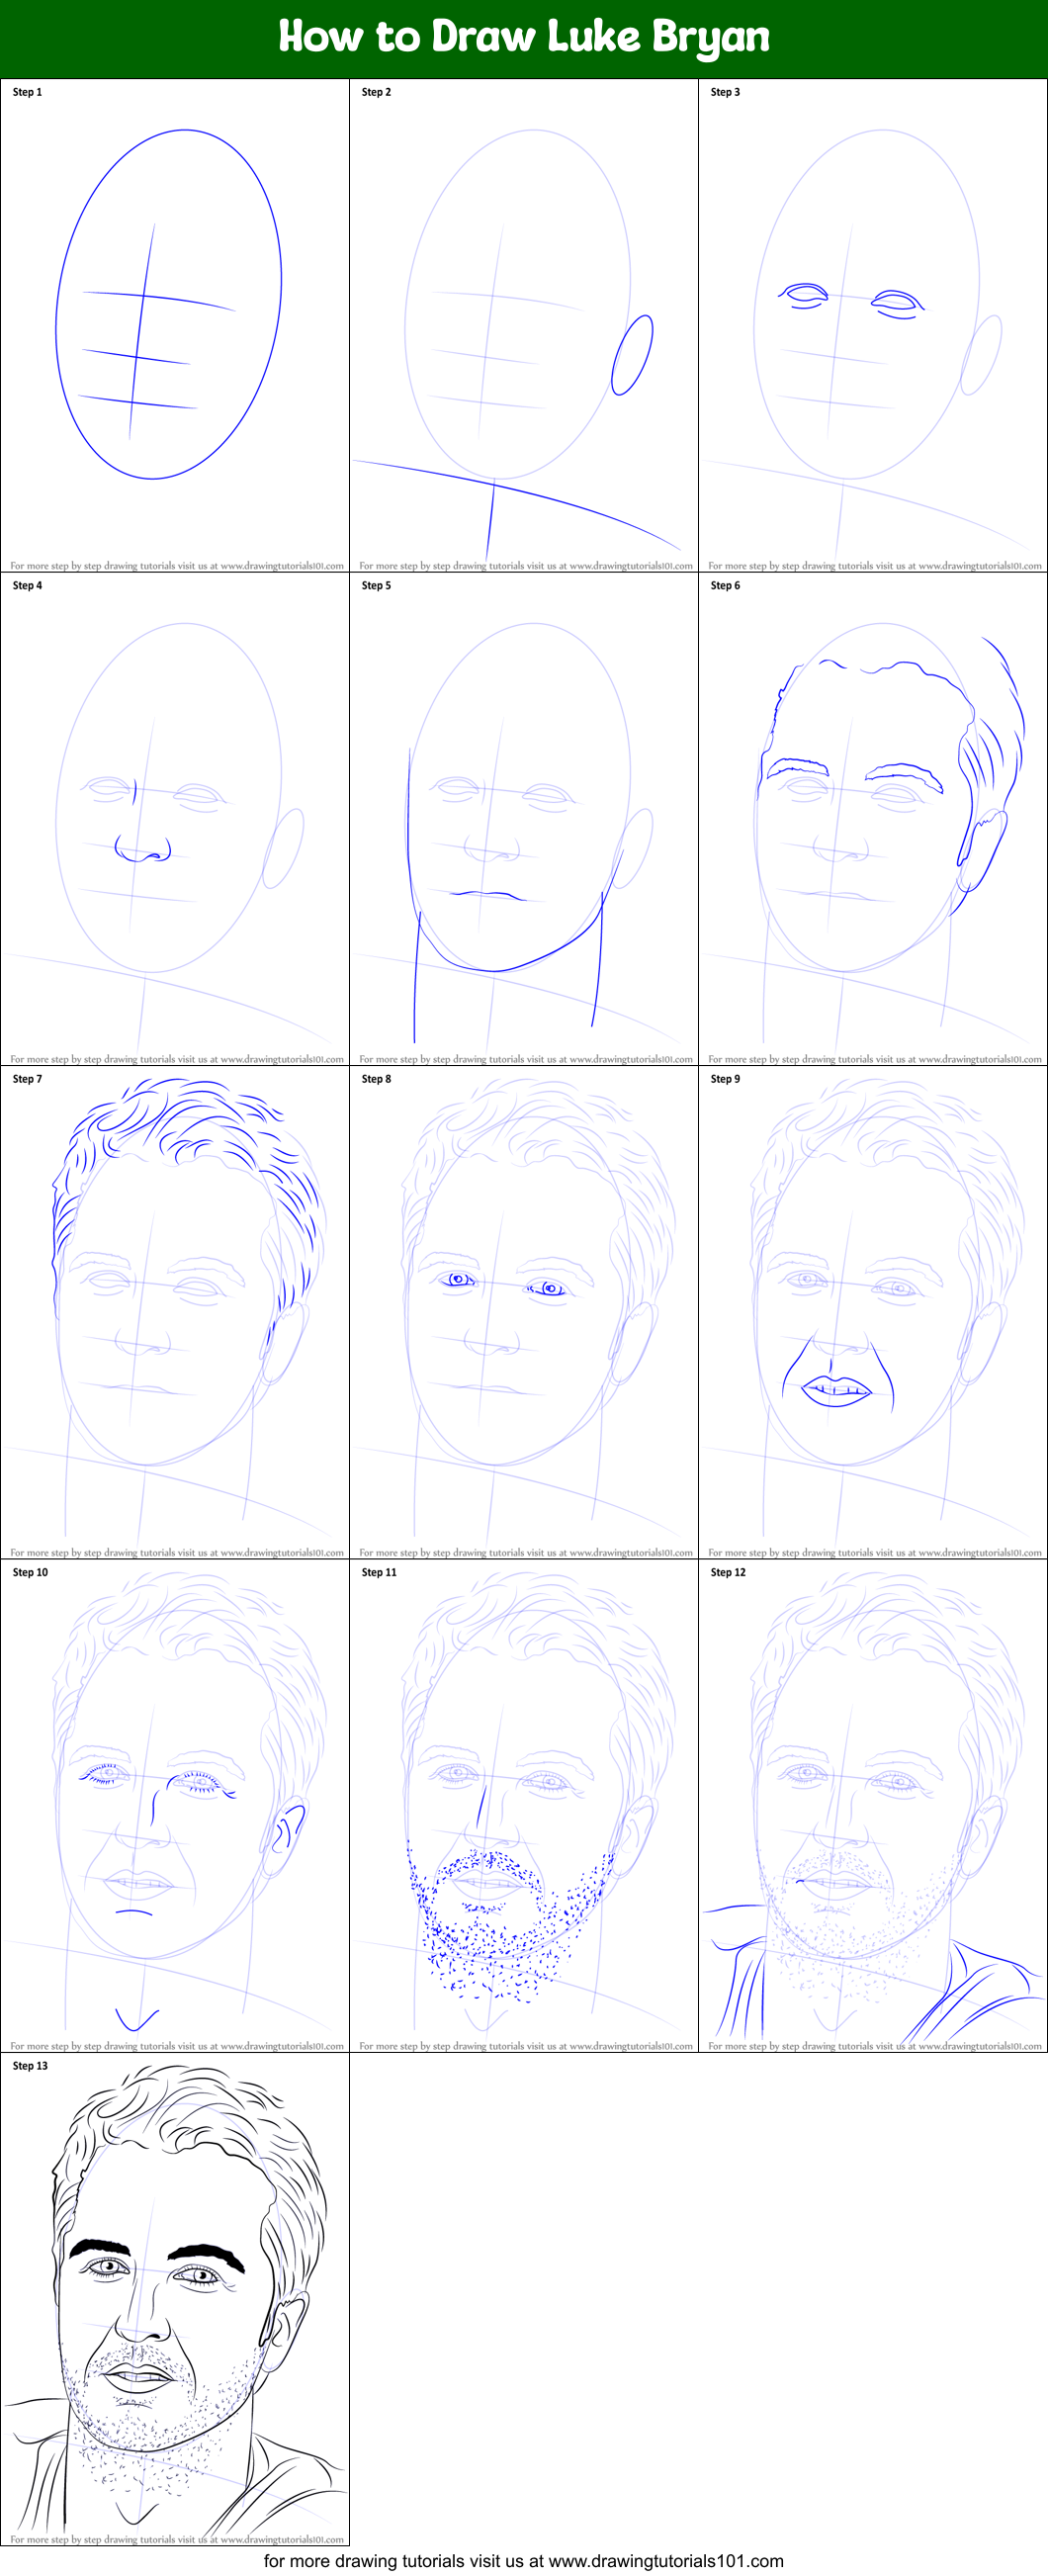 Download How to Draw Luke Bryan printable step by step drawing sheet : DrawingTutorials101.com